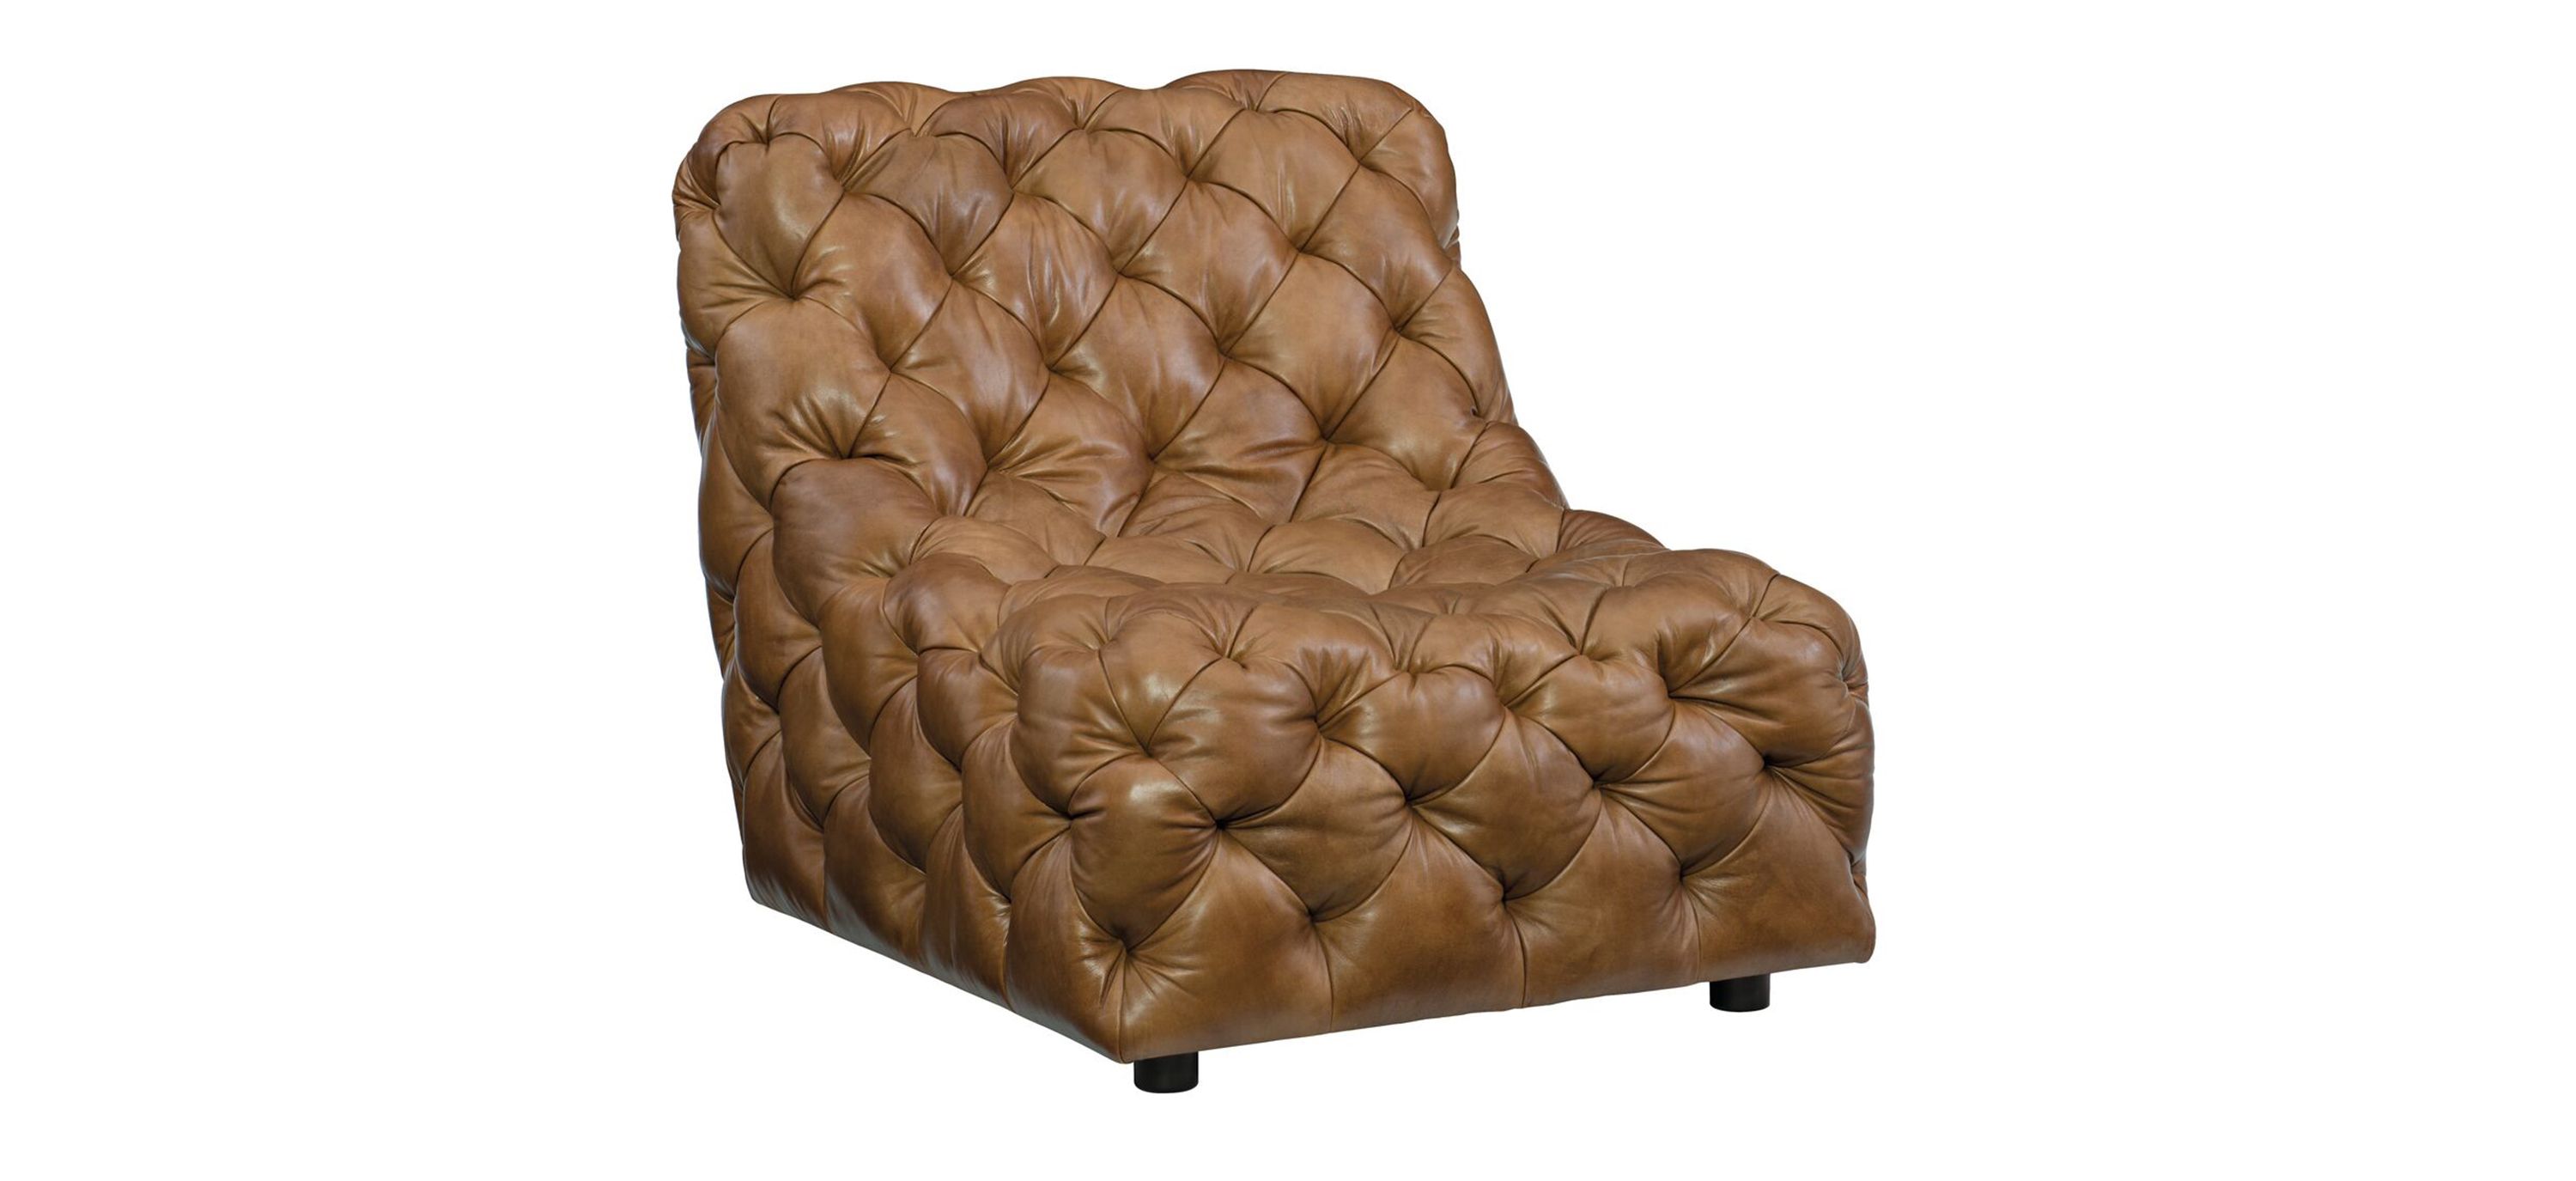 Rigby Leather Chair